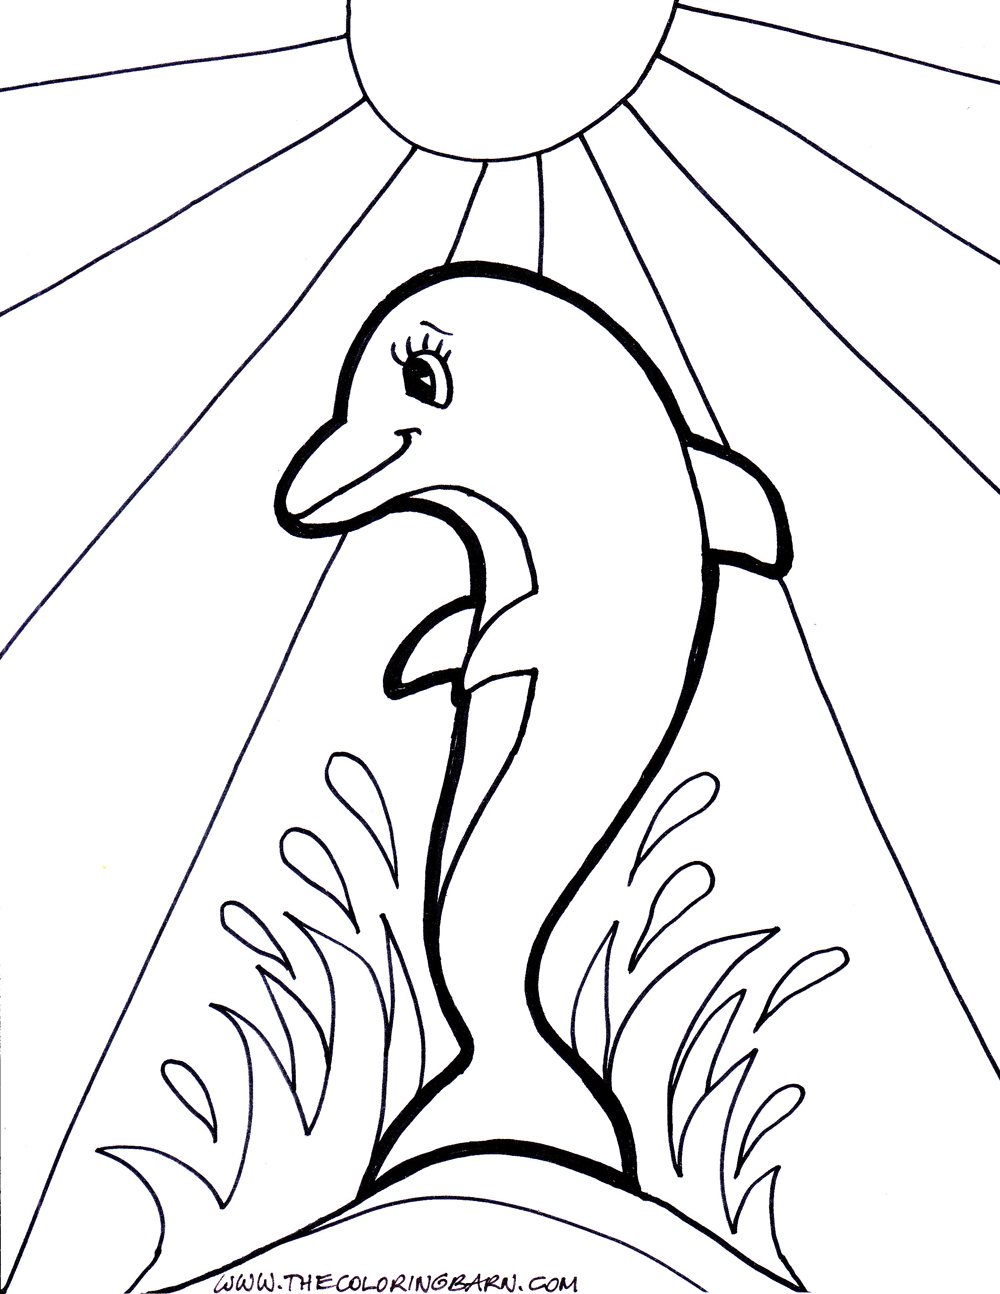 Coloring Pages Of A Dolphin Free Printable Coloring Pages,dolphin